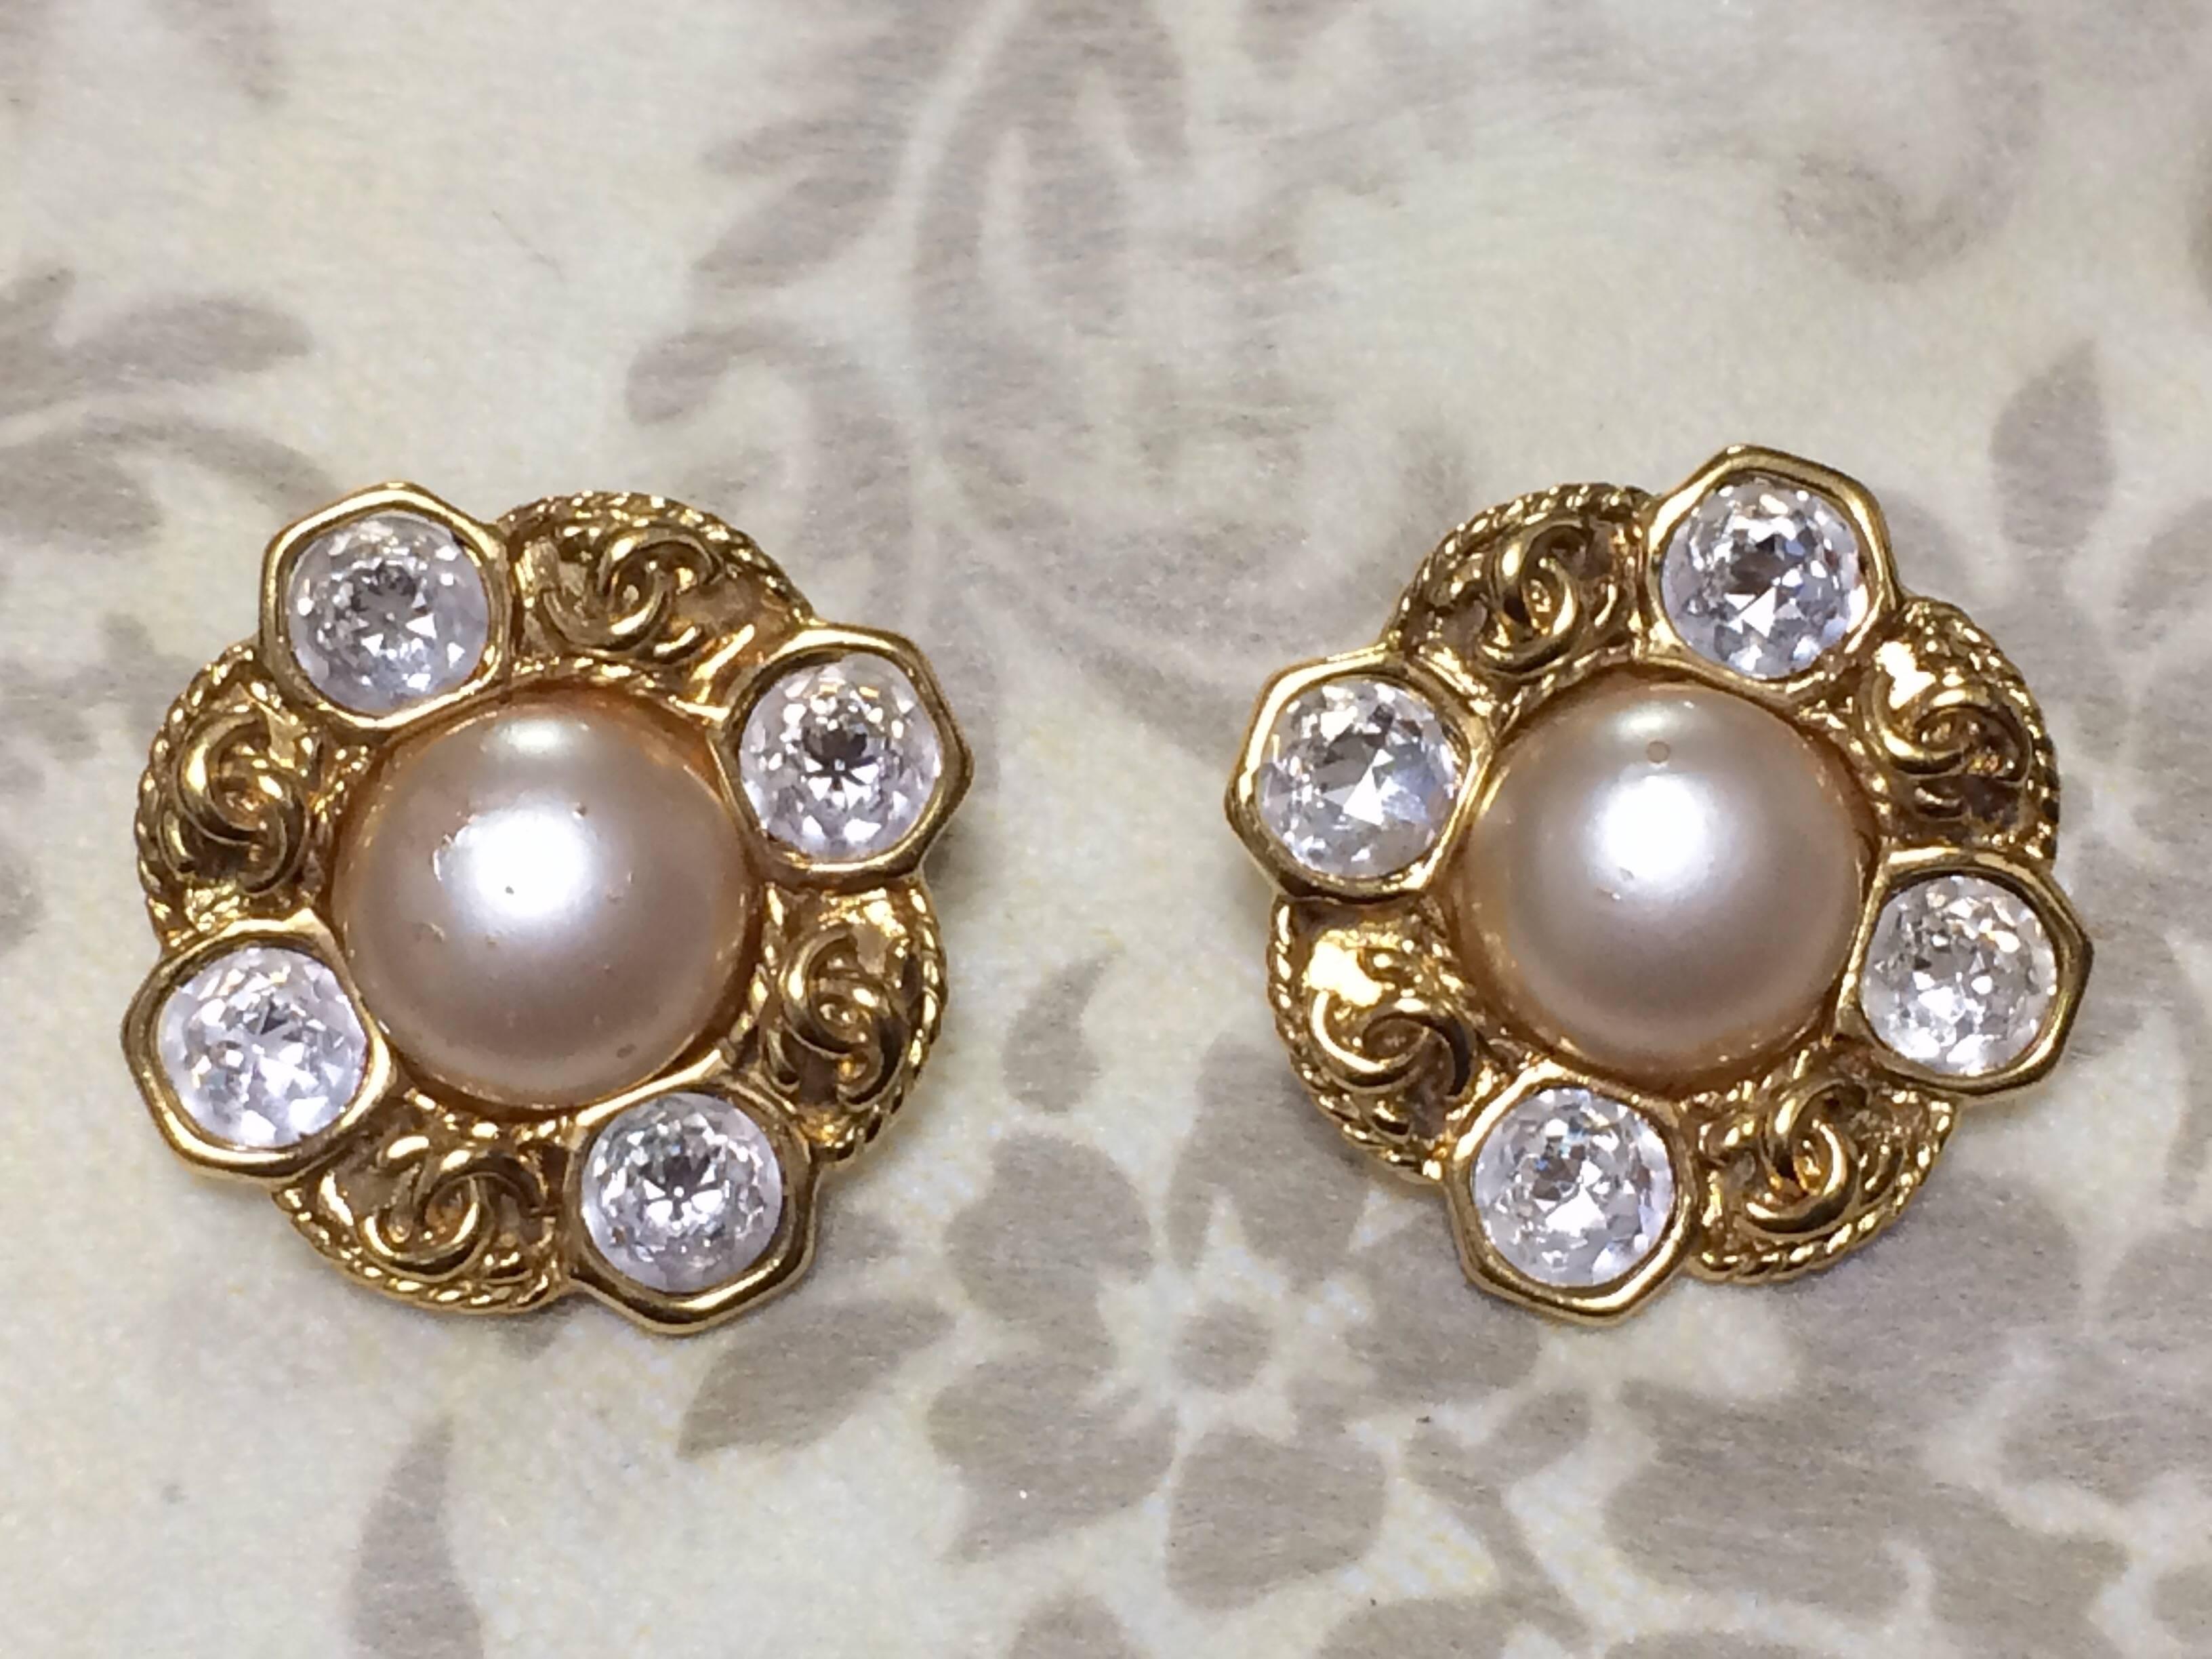 Women's Vintage CHANEL gold tone earrings with a faux pearl, Swarovski crystal stones For Sale